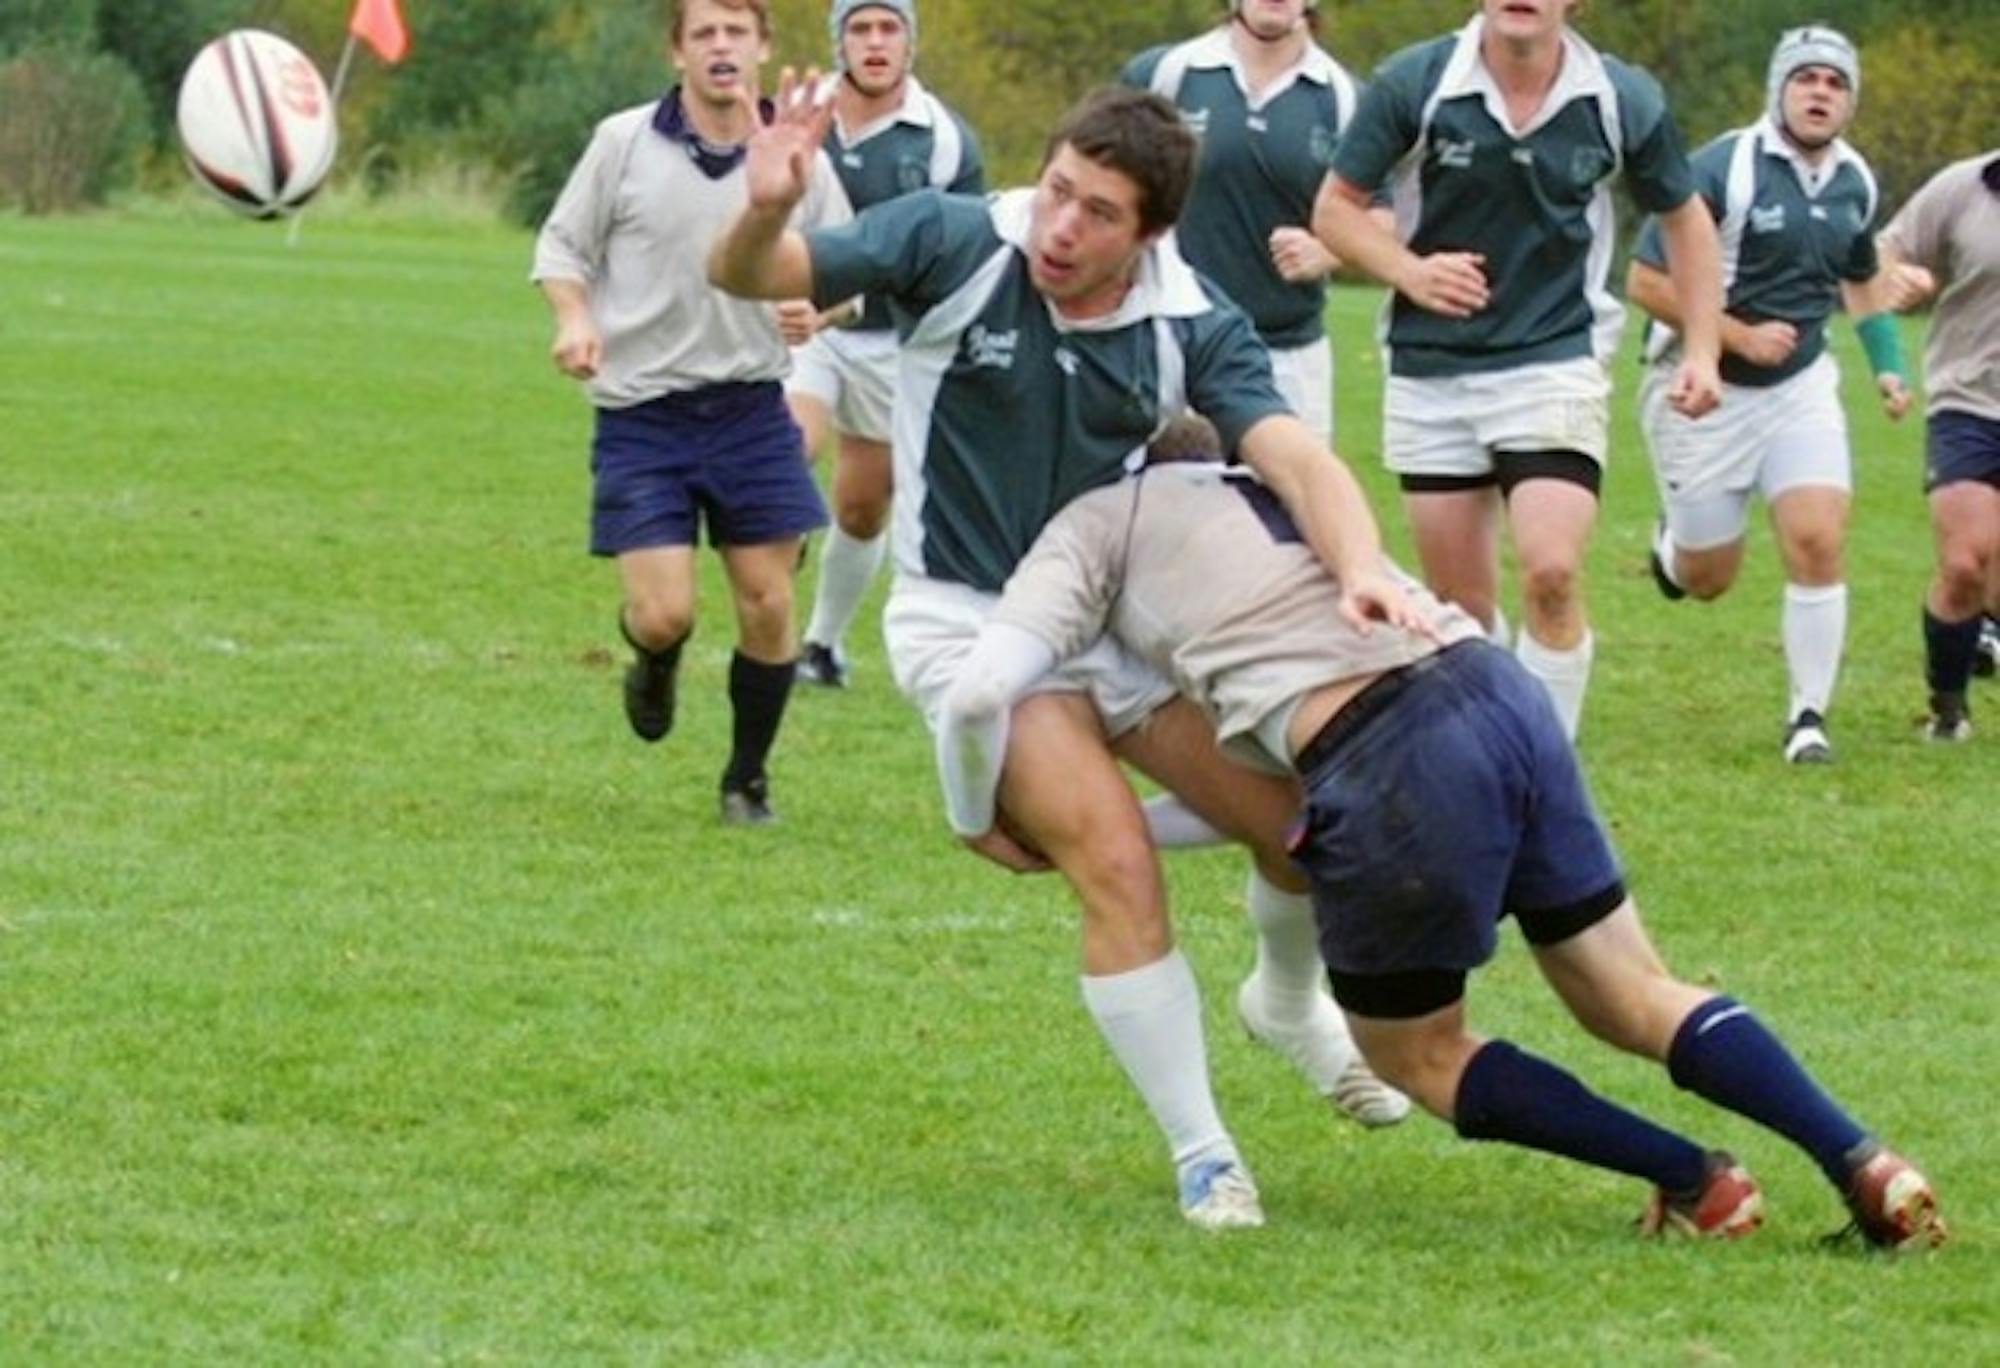 Tom Manzo '07 and the Big Green ruggers put up a Wilt Chamberlain-like performance against UMass on Saturday.